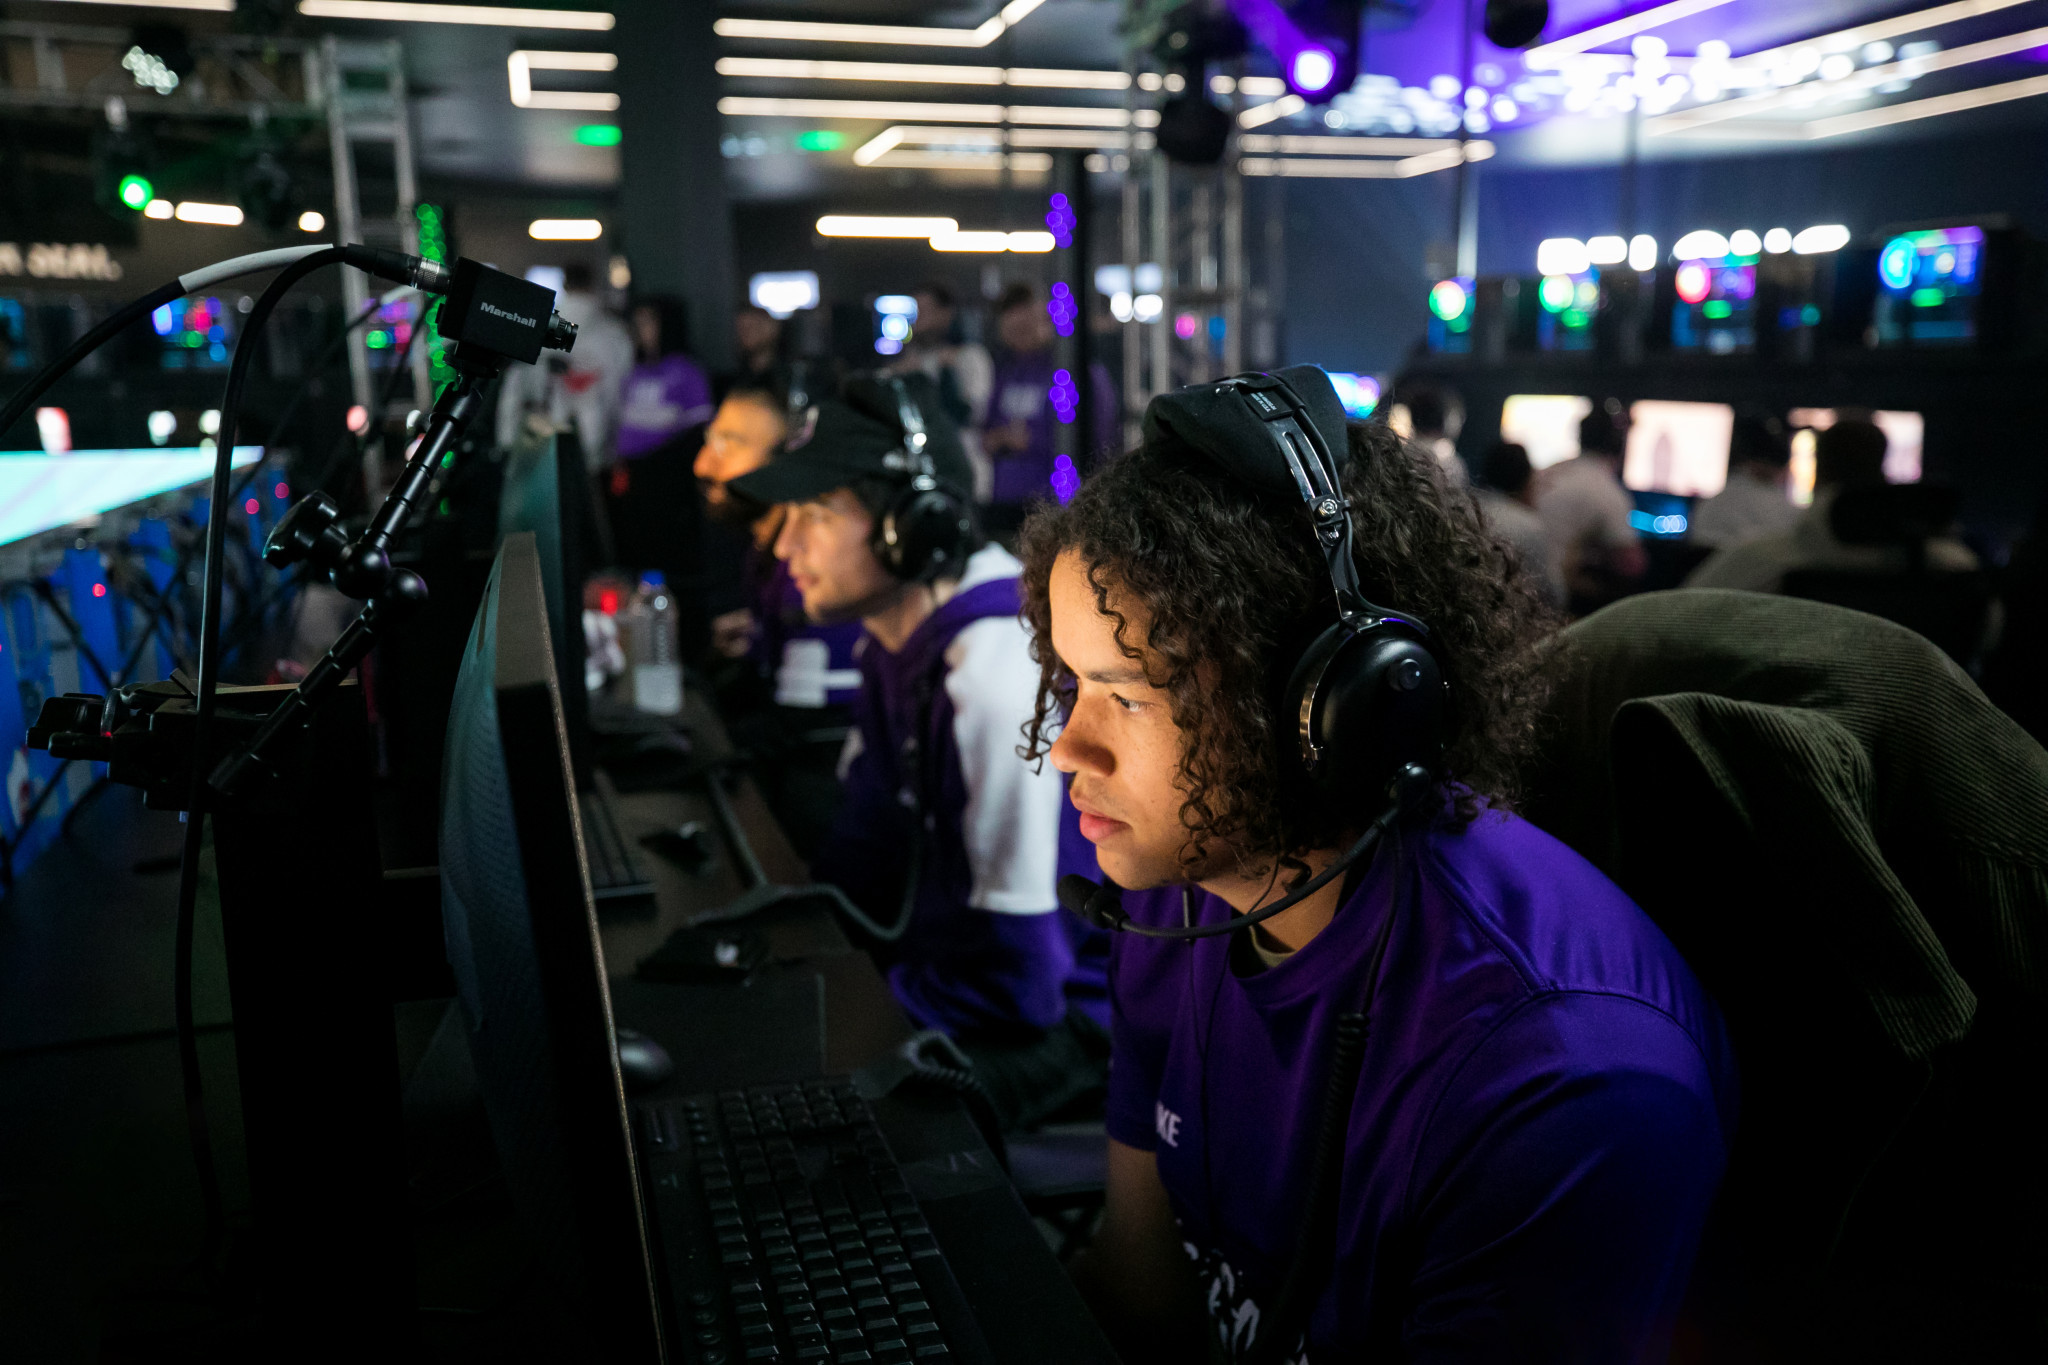 Esports is continuing to grow with a pilot event set to be staged at the Santiago 2023 Pan American Games after one was held at the Birmingham 2022 Commonwealth Games ©Getty Images